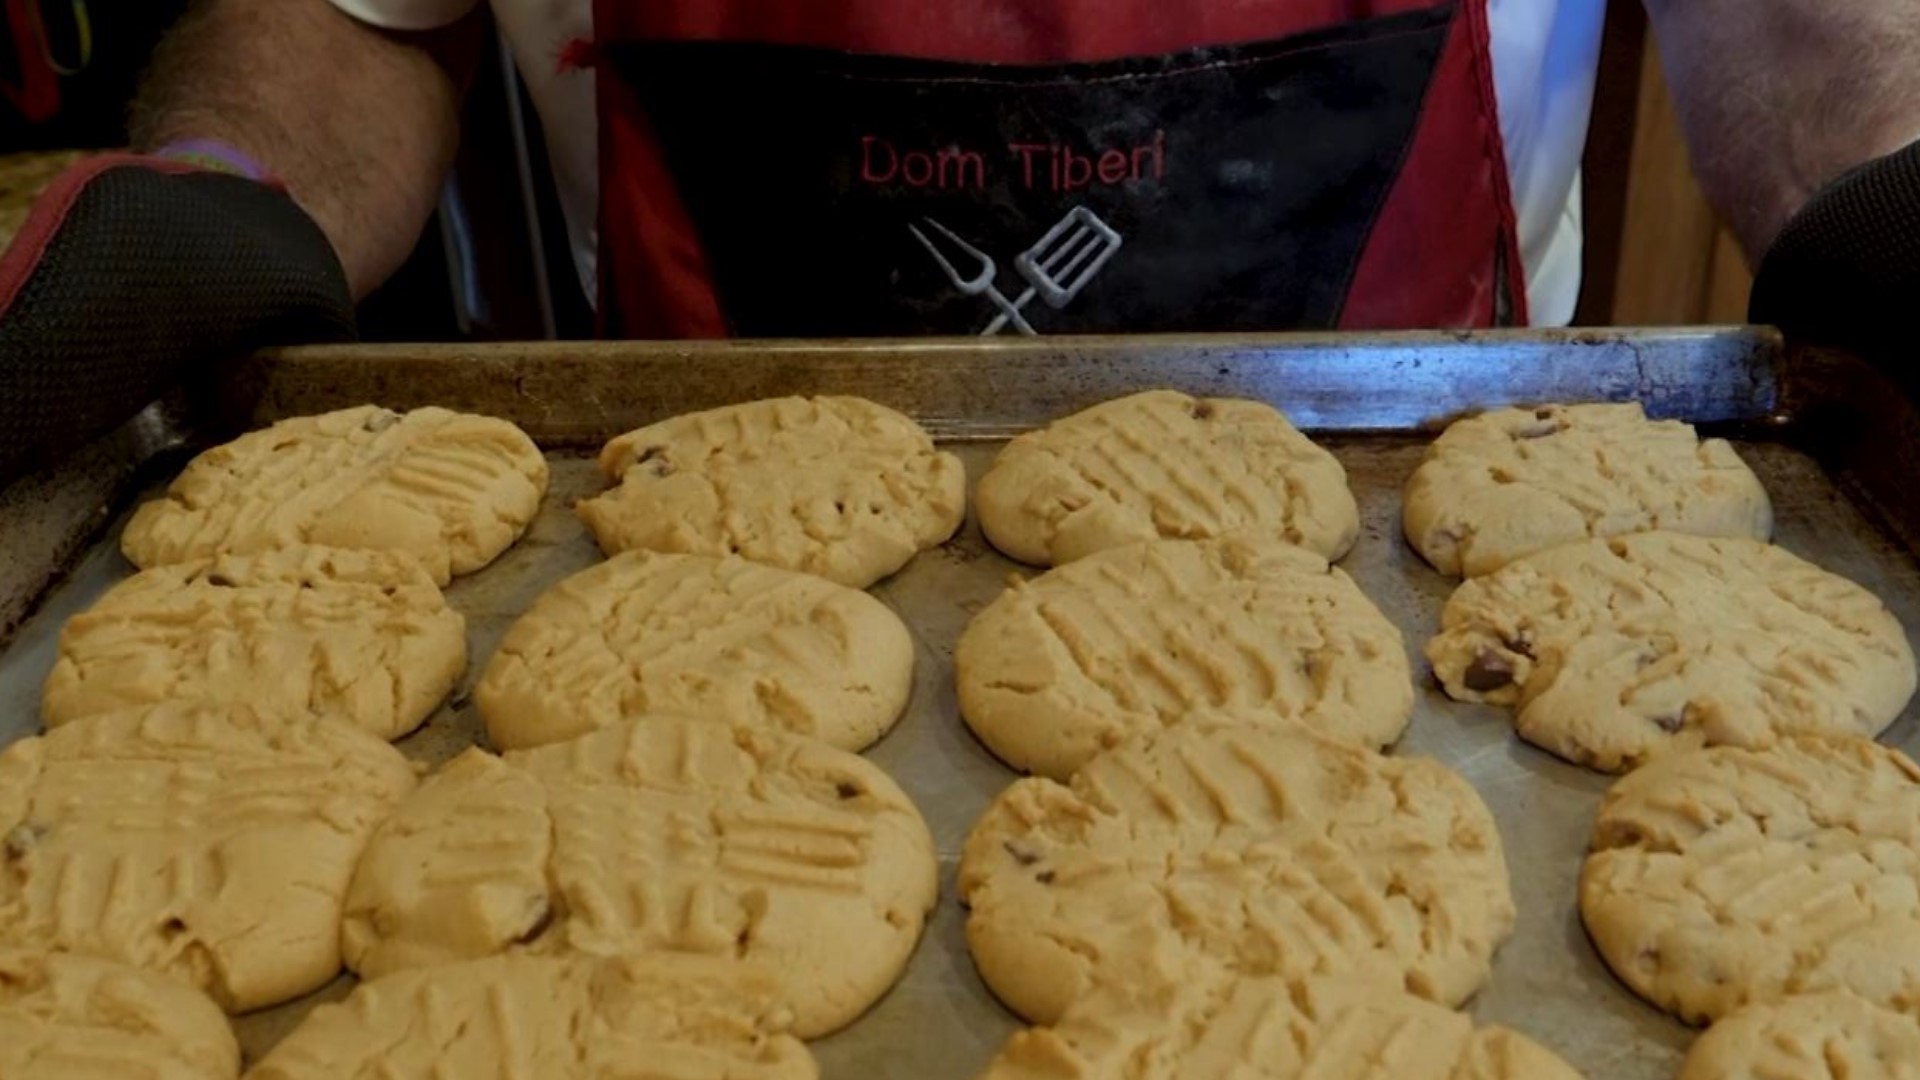 Yes, Dom Tiberi can bake too! Watch how to make his peanut butter chocolate chip cookies.